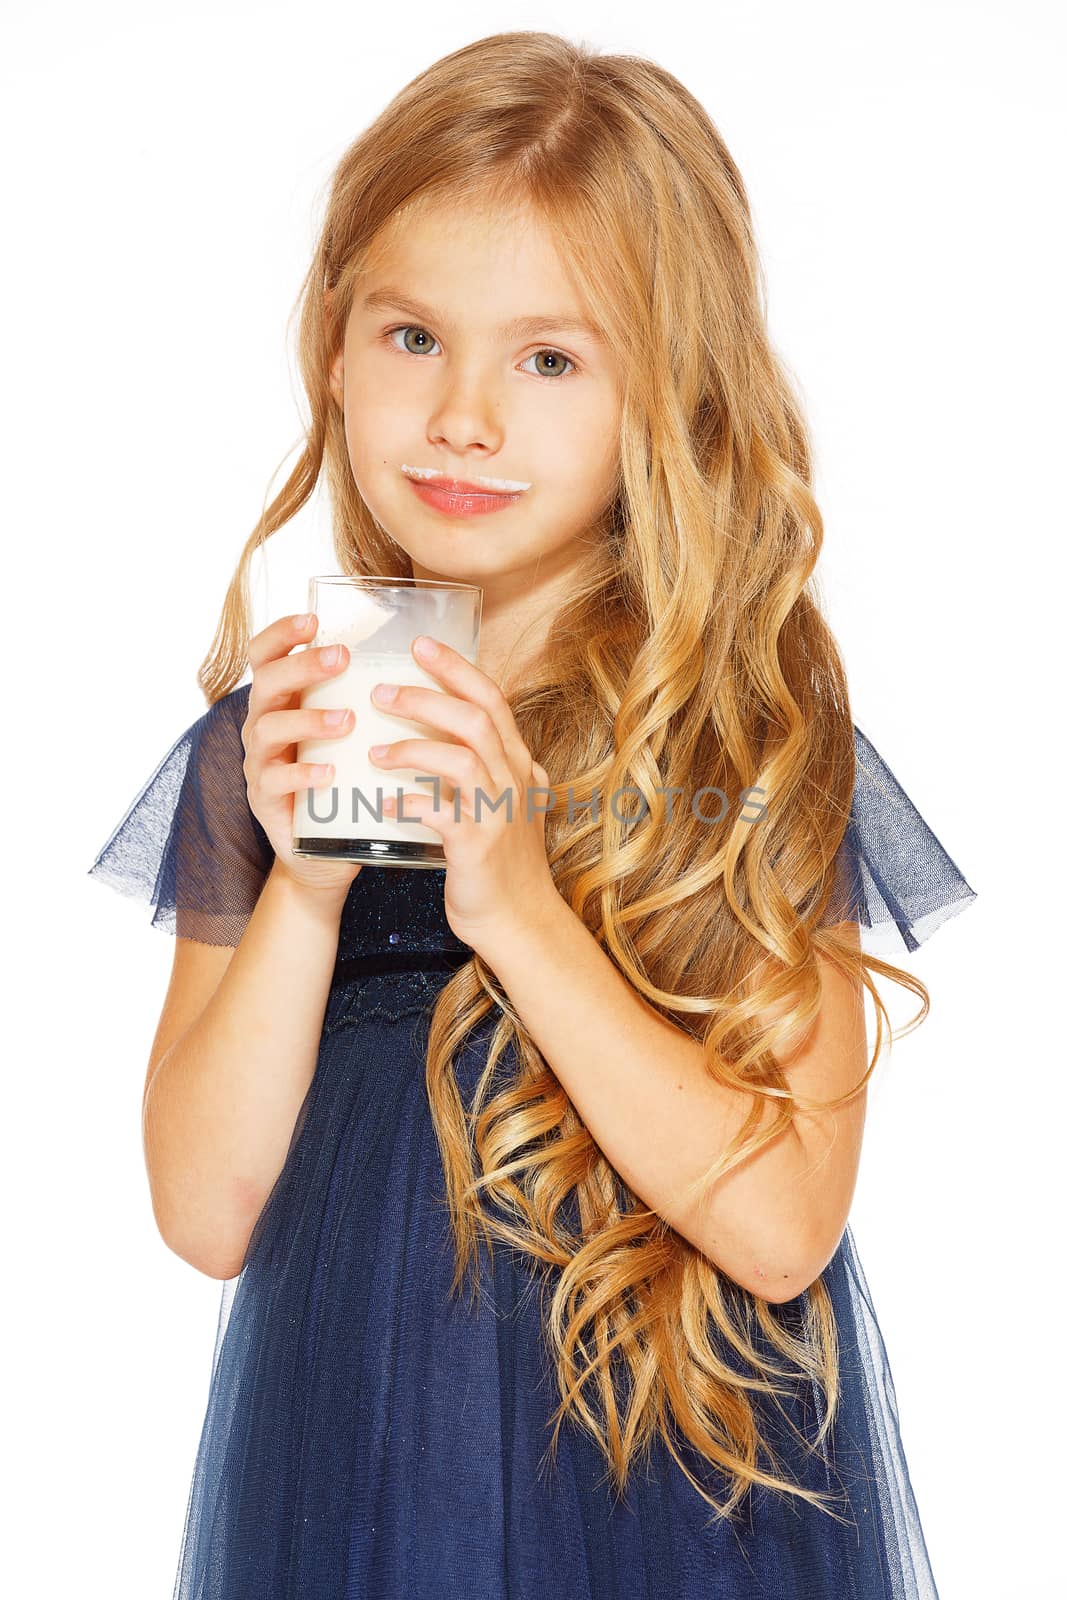 Cute little girl with blond hair in a blue dress holding a glass of milk